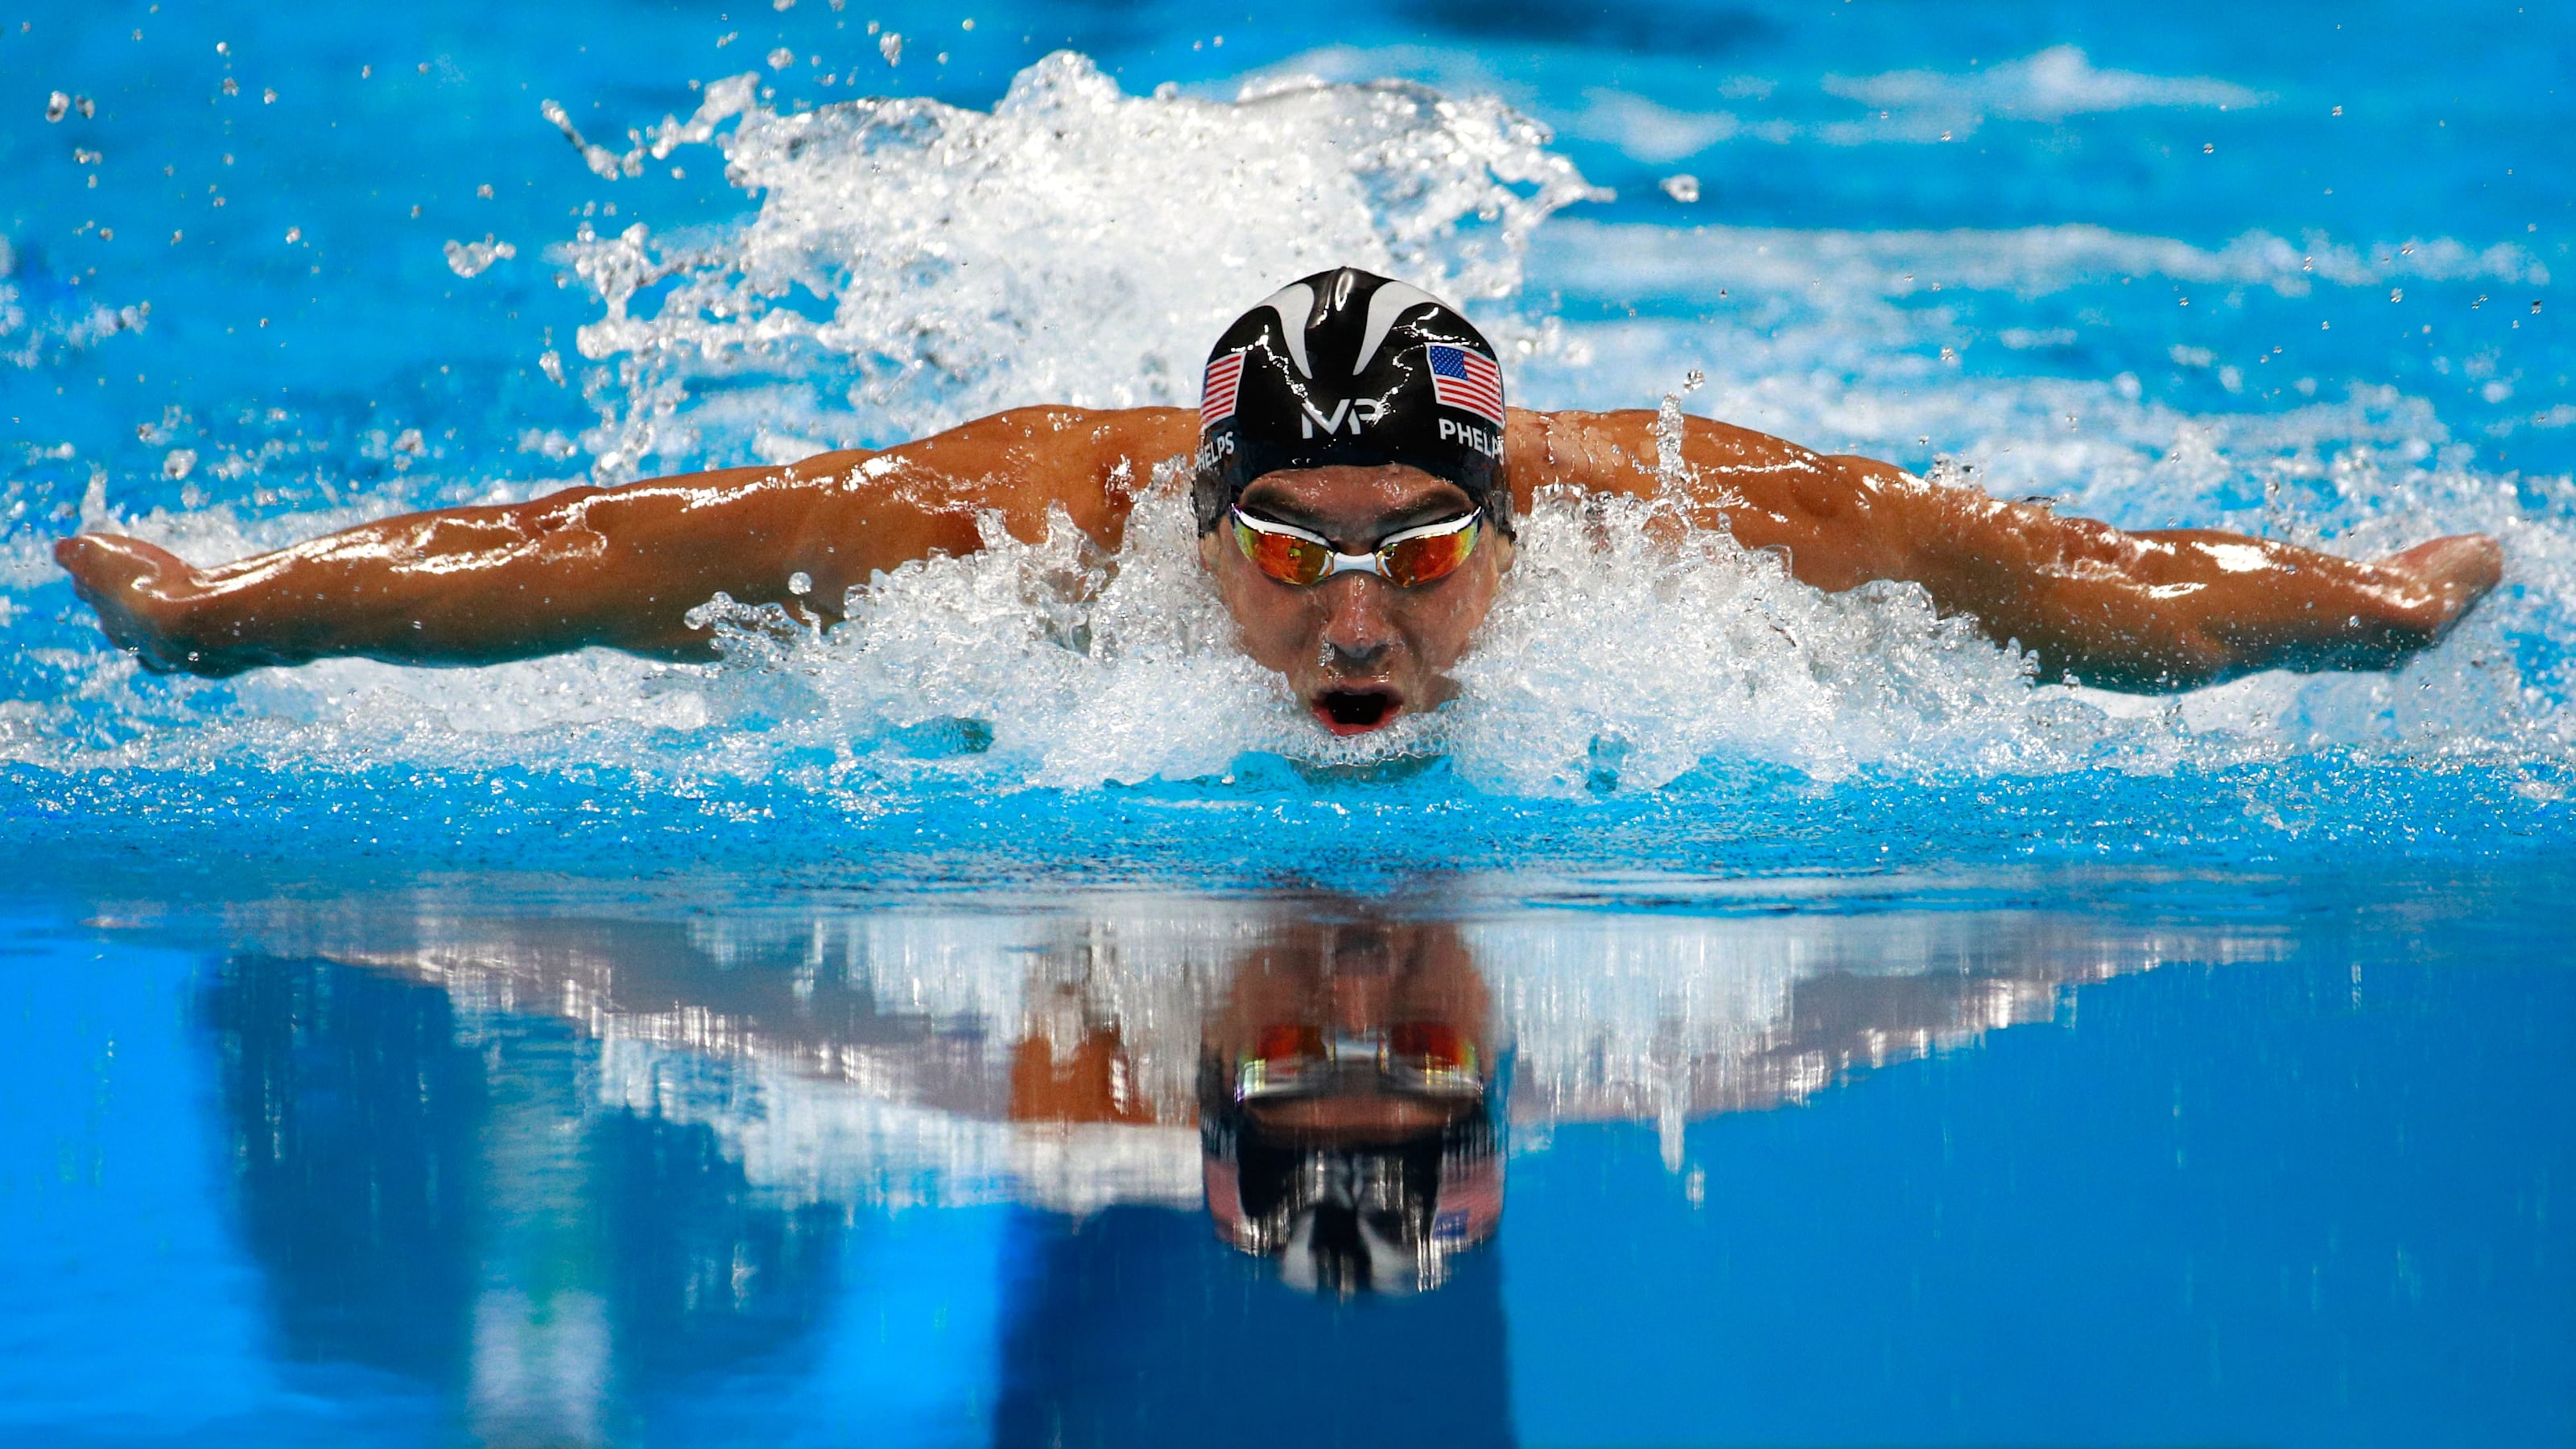 Michael Phelps: 23 Gold Medals – Swimming, 2004-2016 (Athens, Beijing, London, Rio)